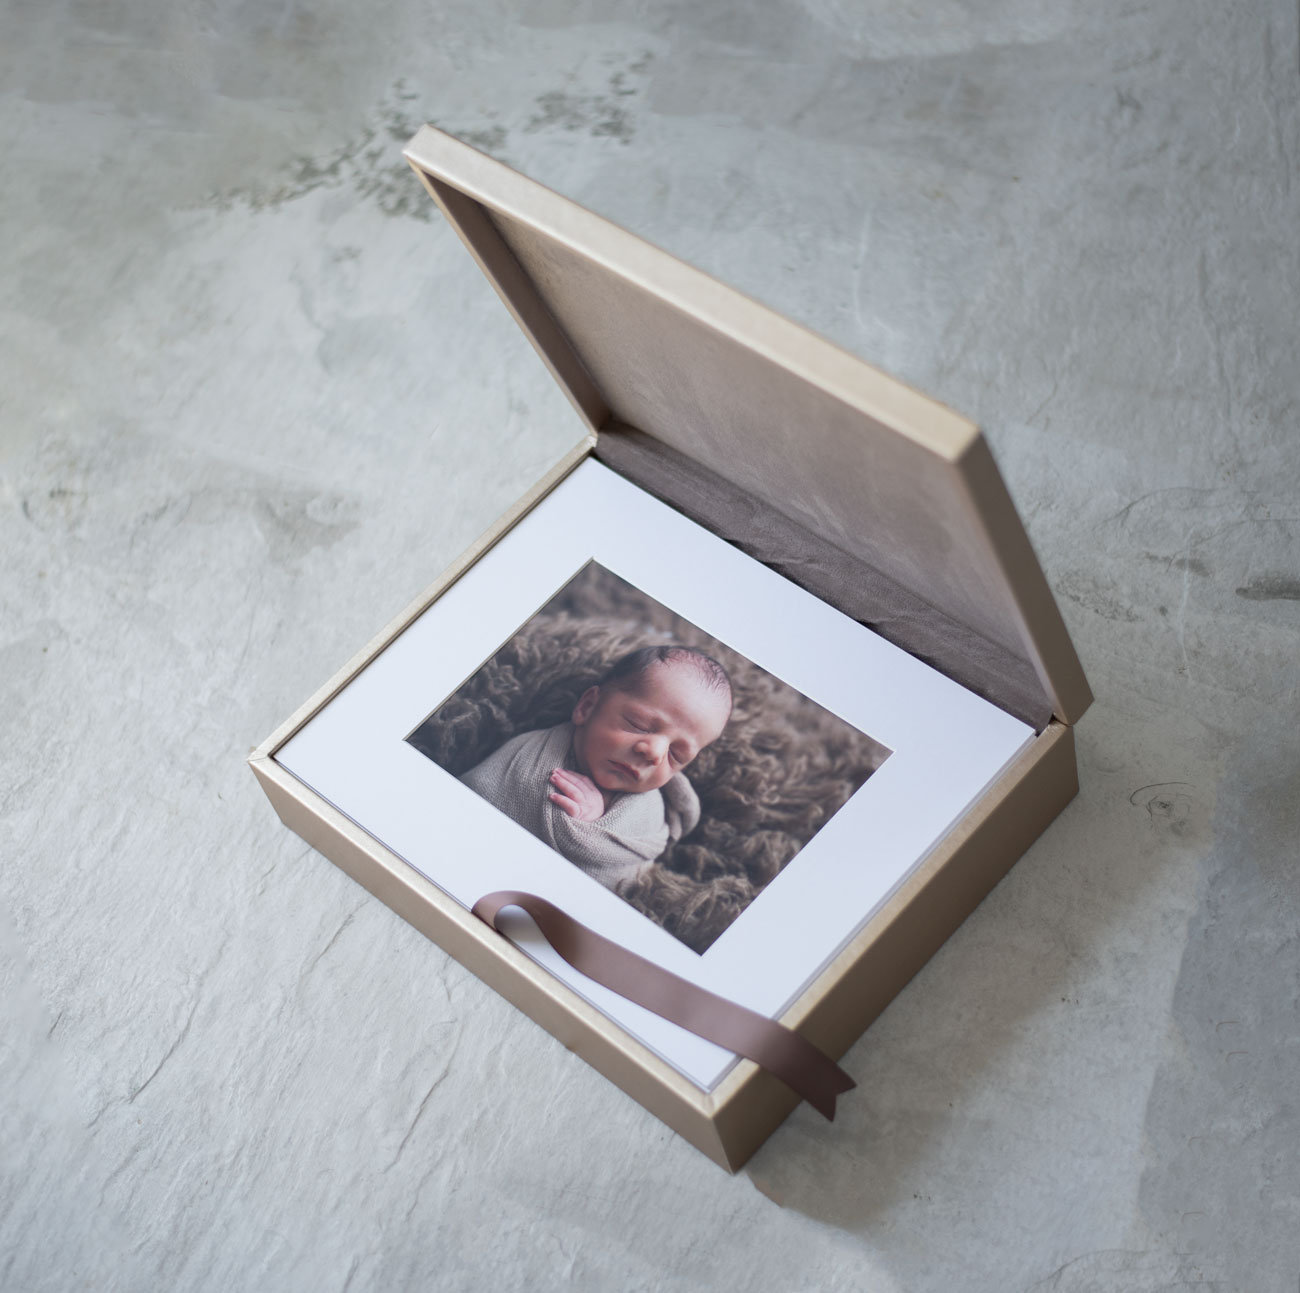 matted prints in Sutherland Photography folio box